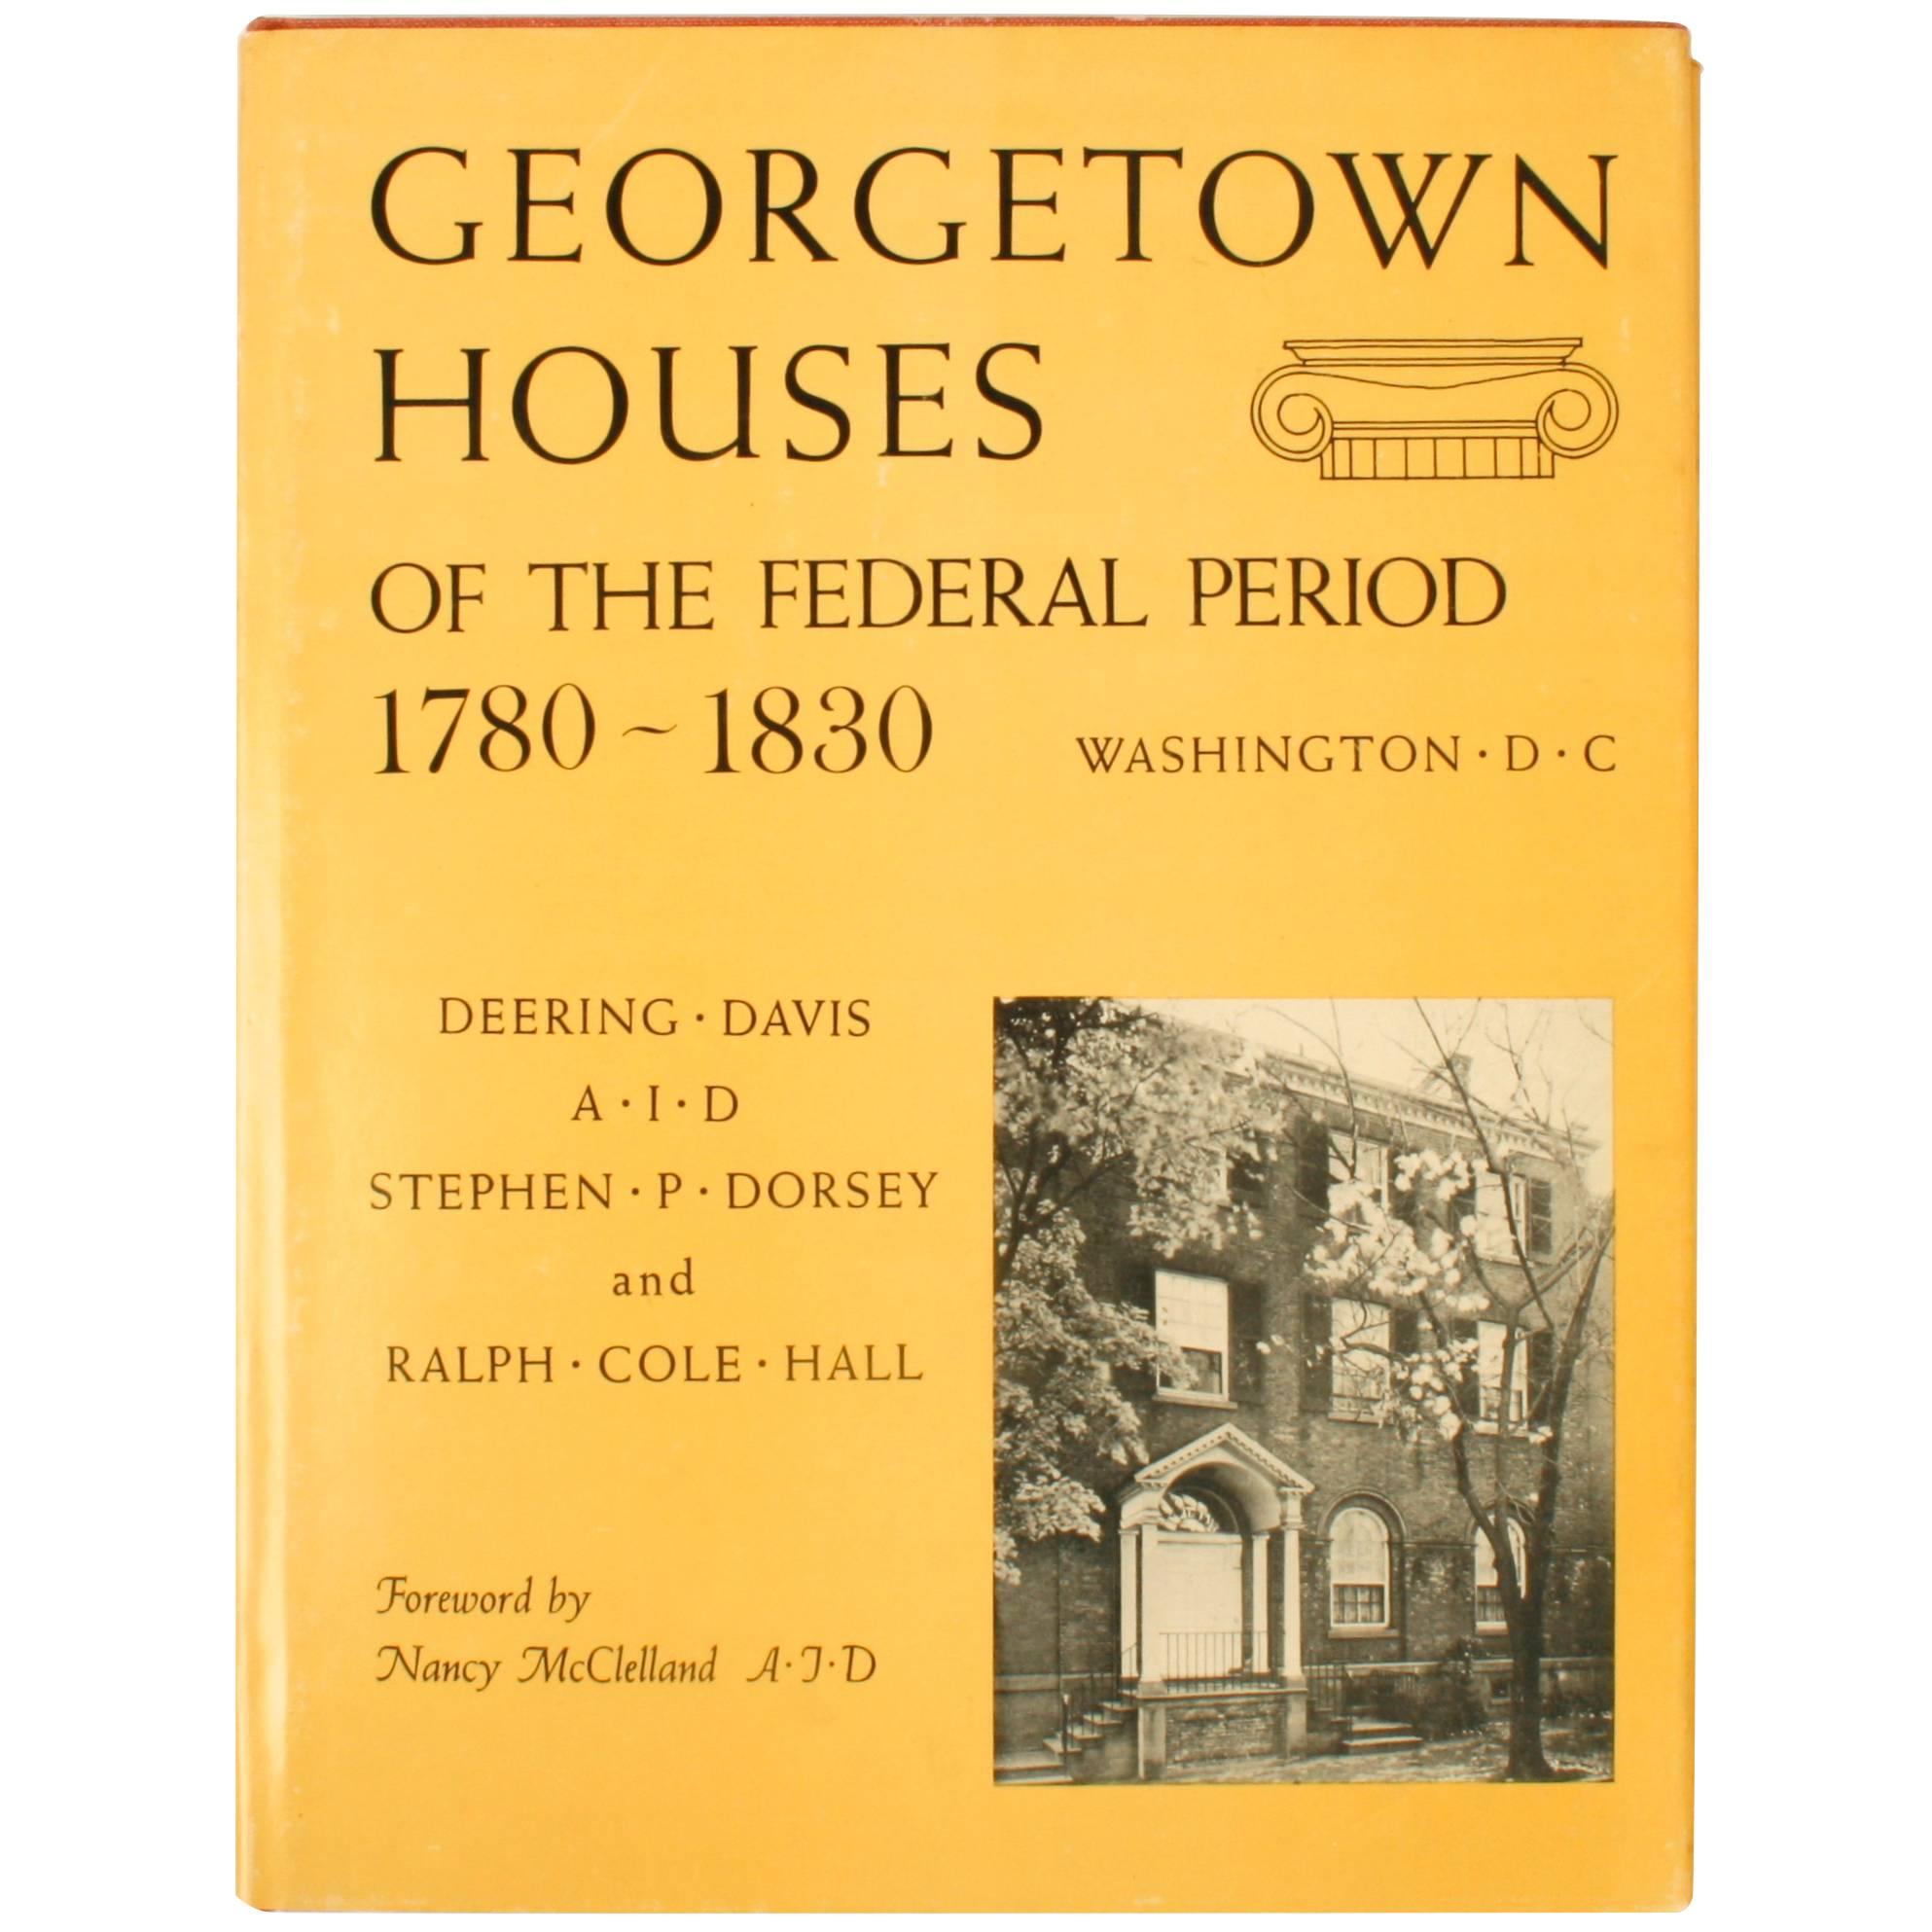 Georgetown Houses of the Federal Period, 1780-1830